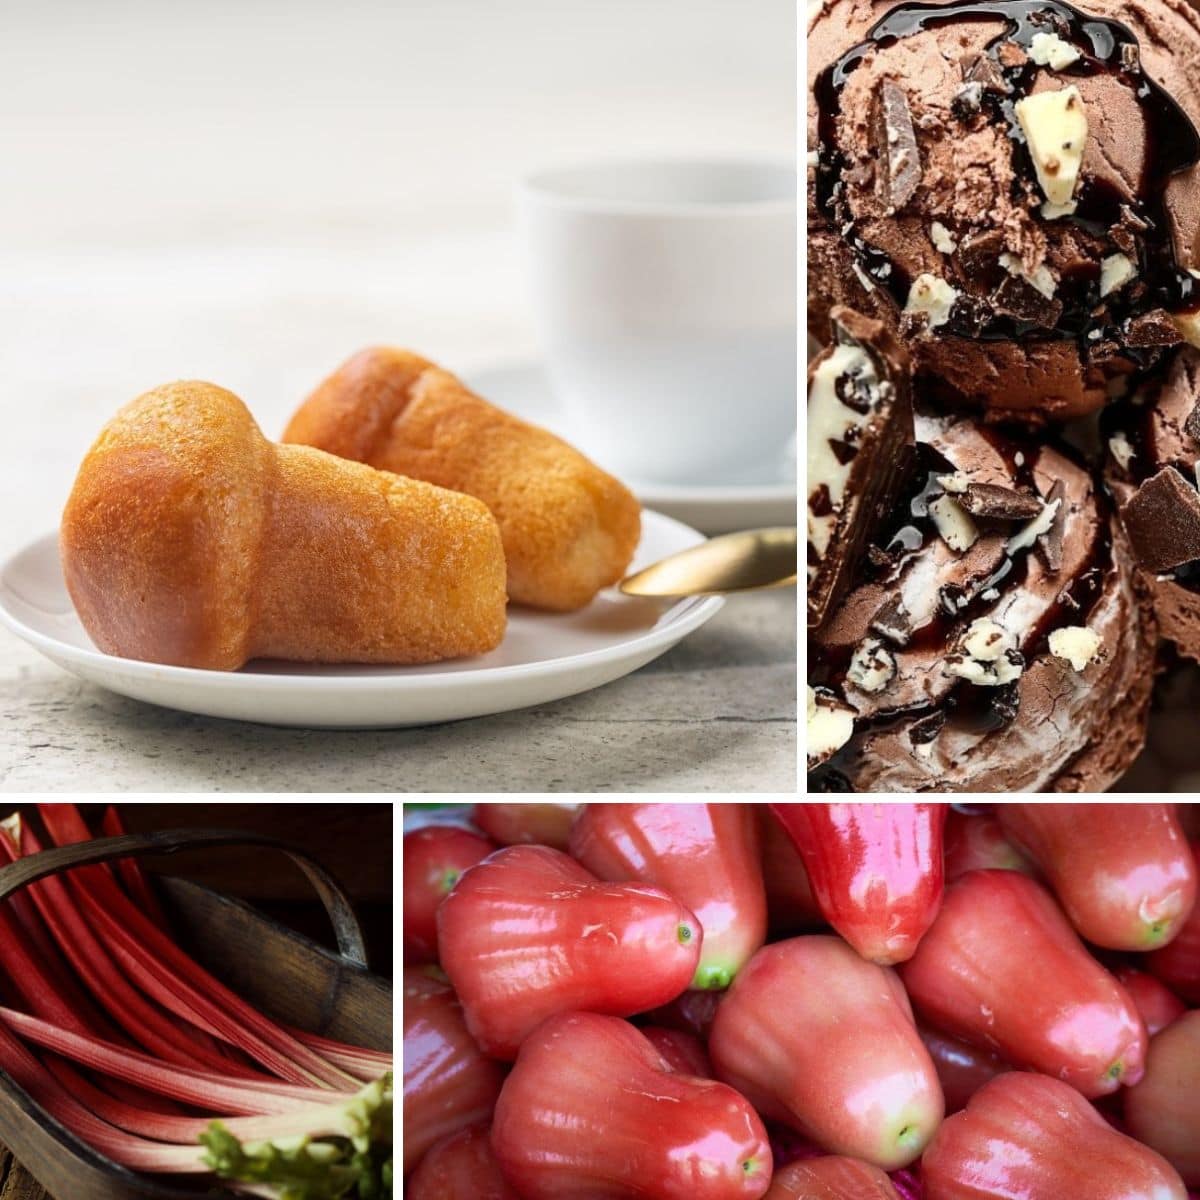 A collage of photos showing different types of fruits and desserts, featuring foods that start with 'r'.